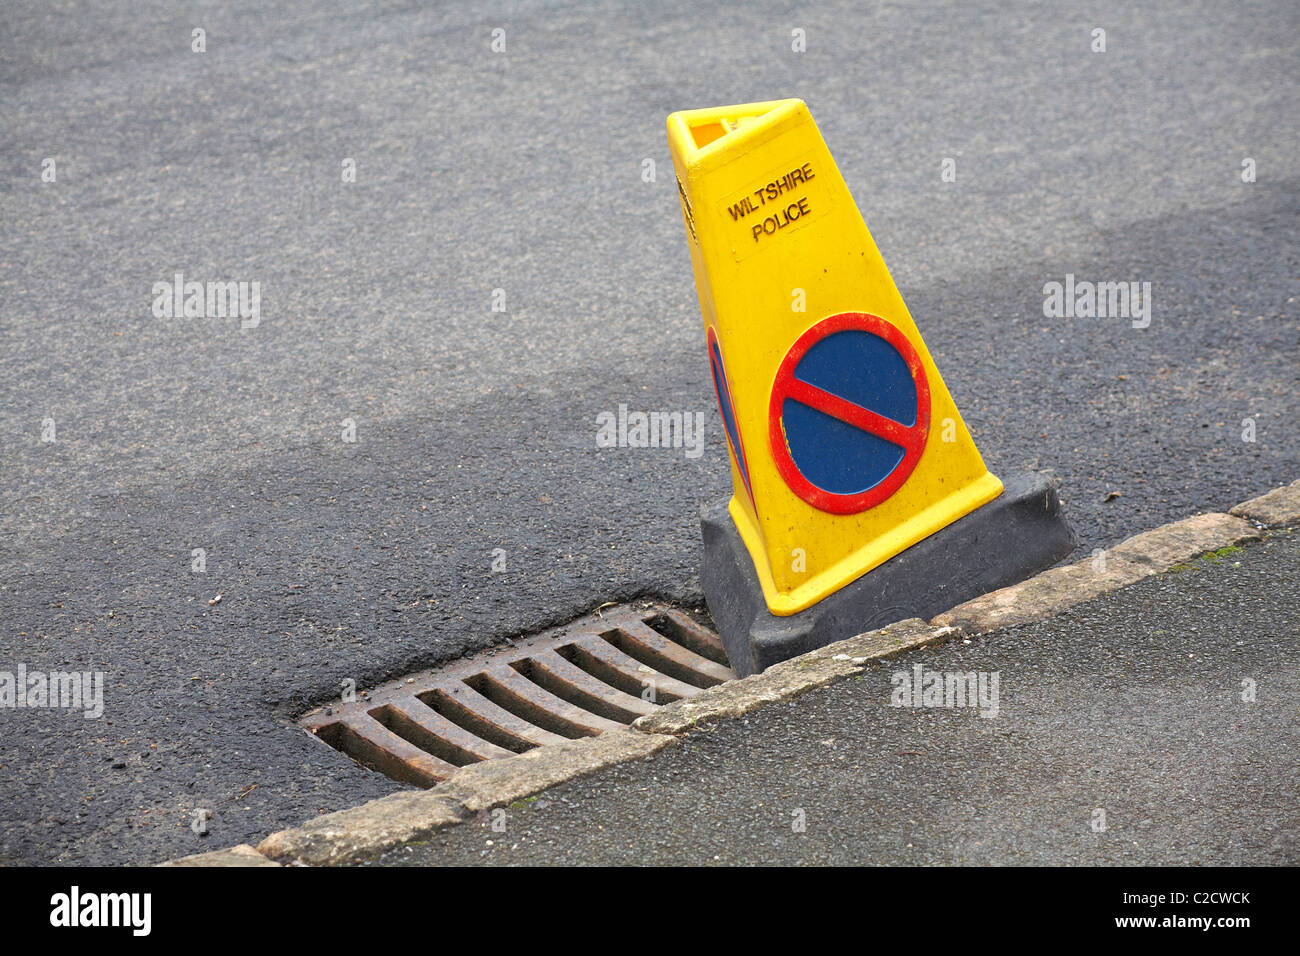 Wiltshire Police no parking cone by side of drain cover in road Stock Photo